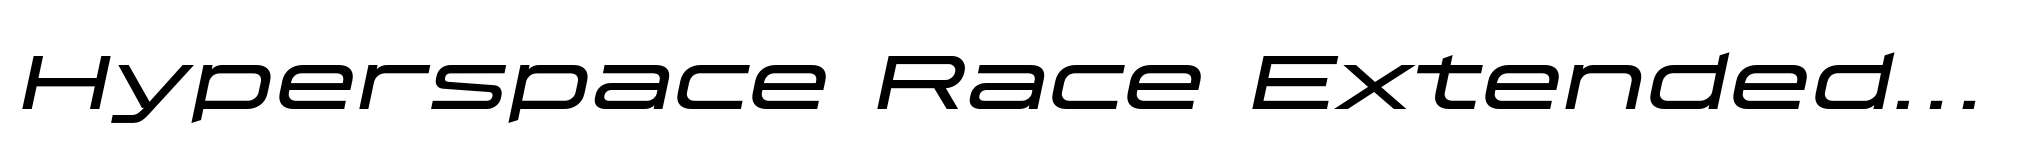 Hyperspace Race Extended Italic image